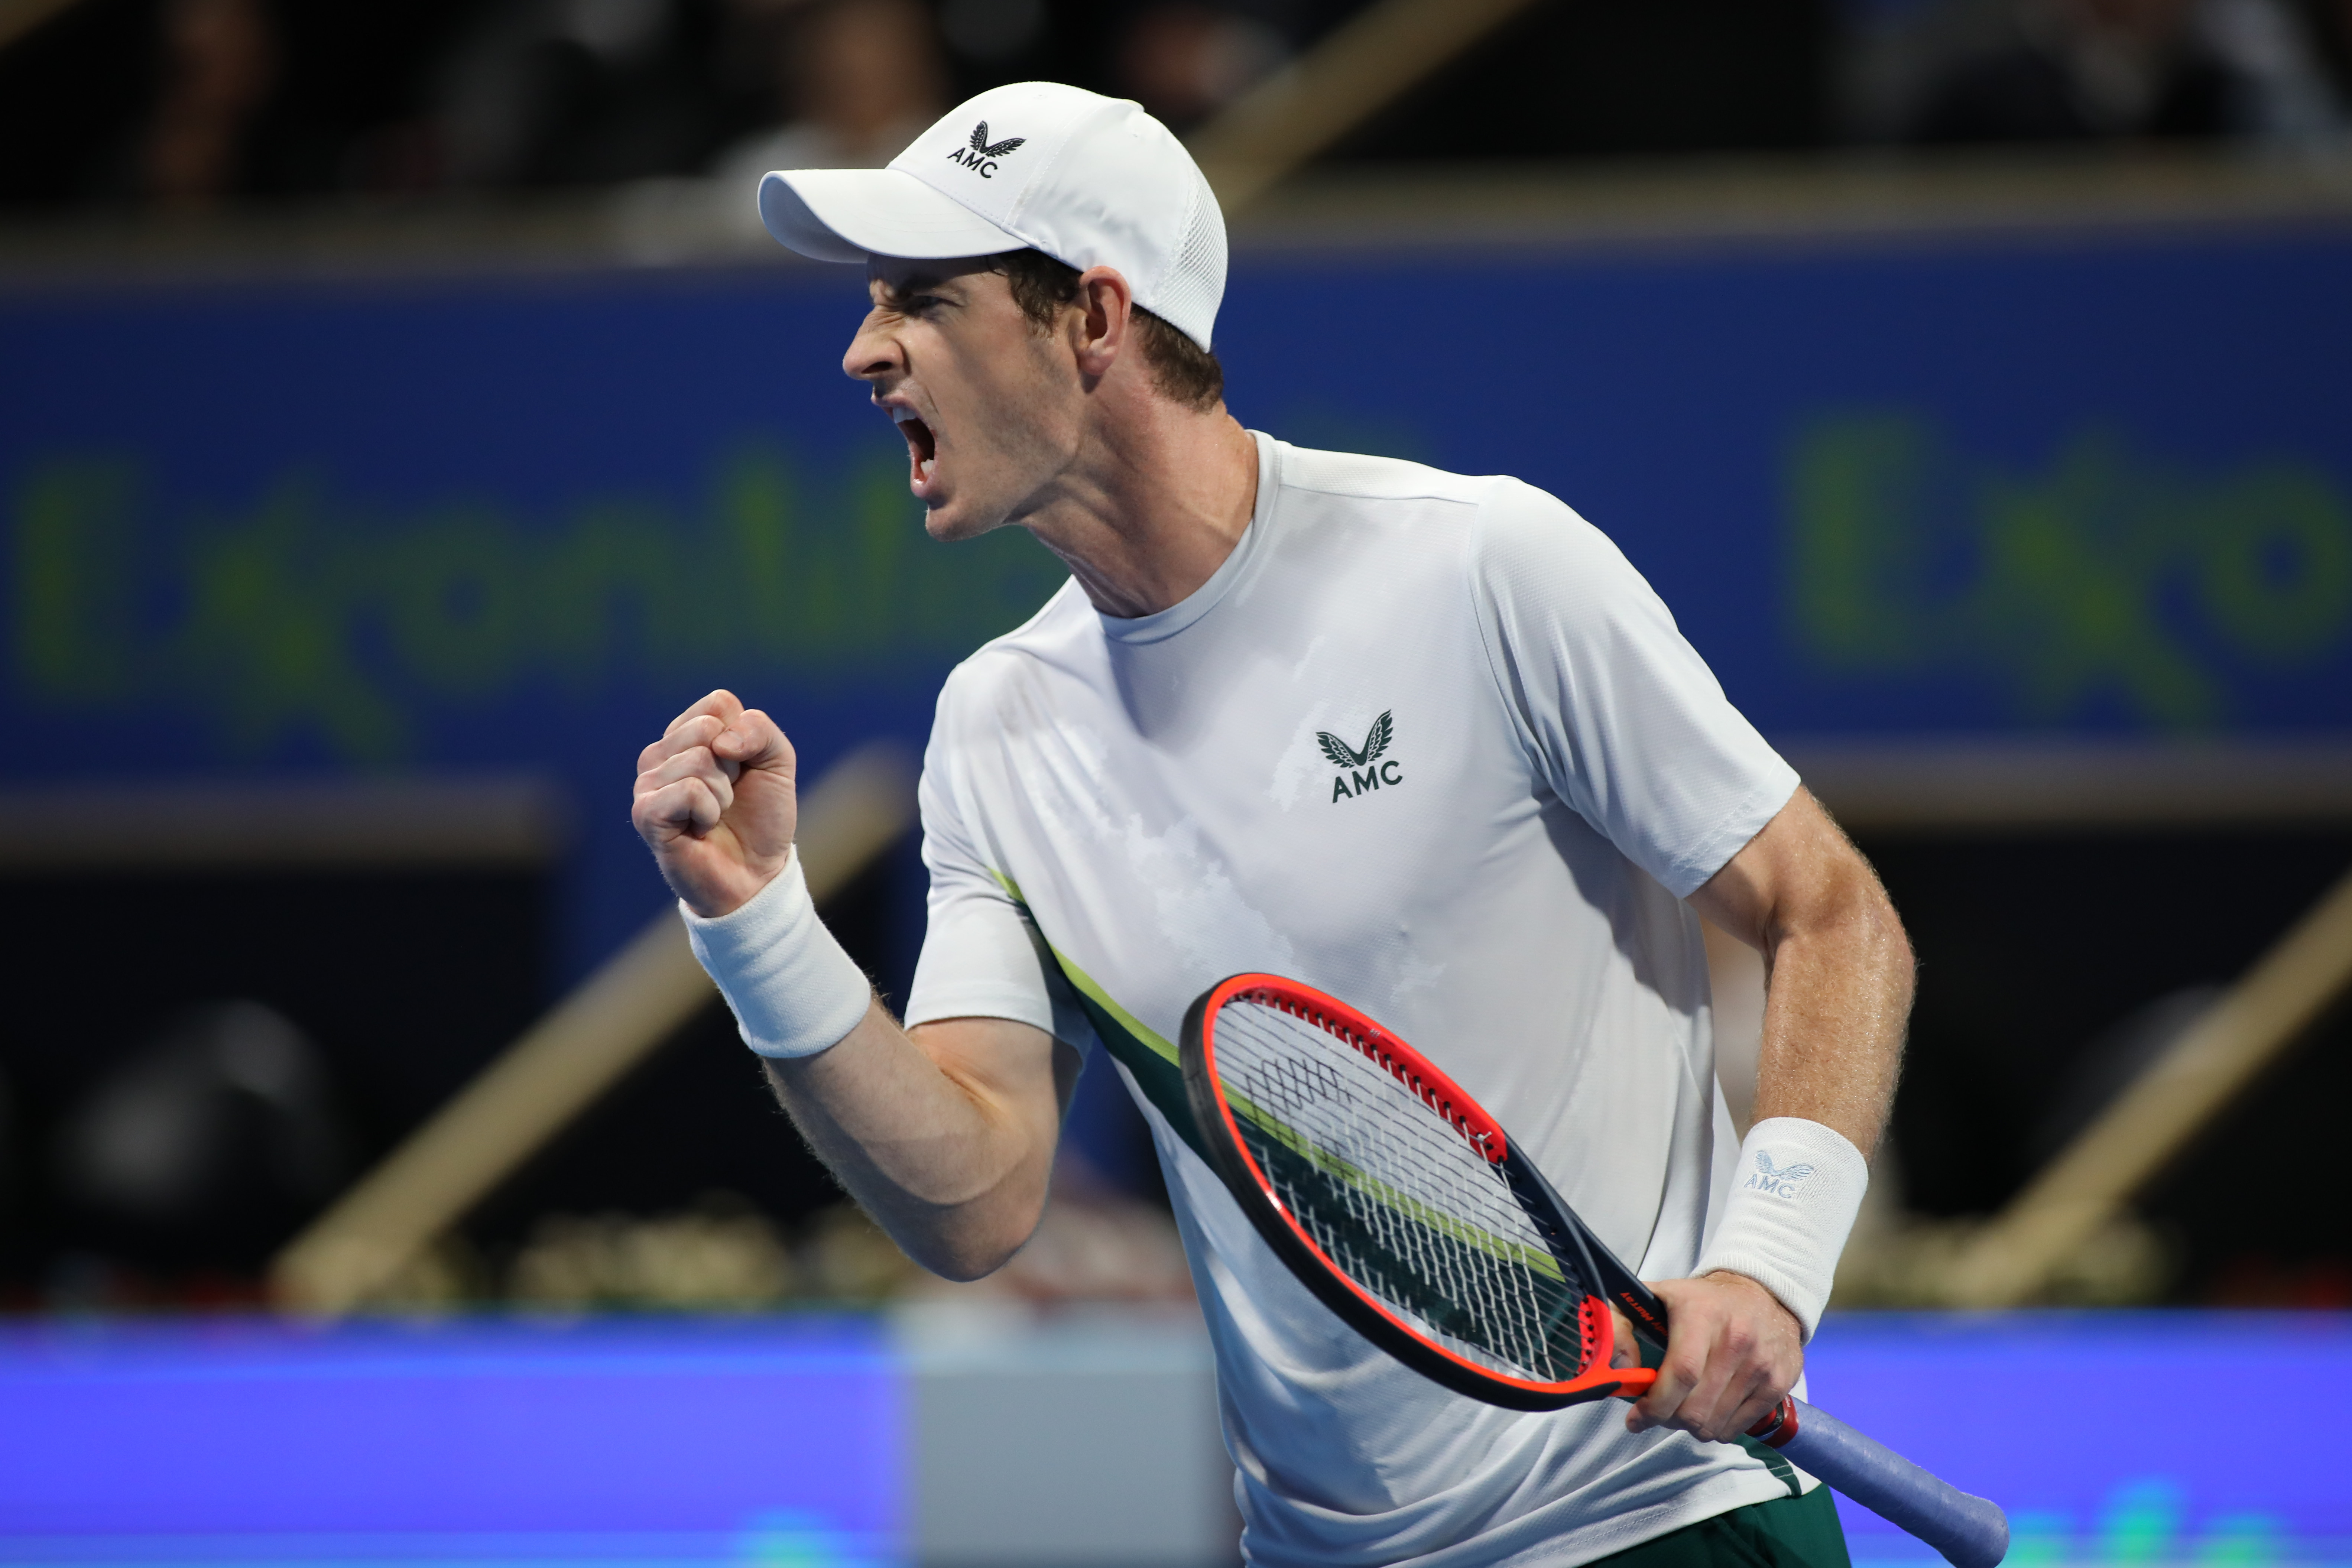 Two points from losing, Andy Murray outlasts Alexander Zverev in Doha; Andrey Rublev saves three match points